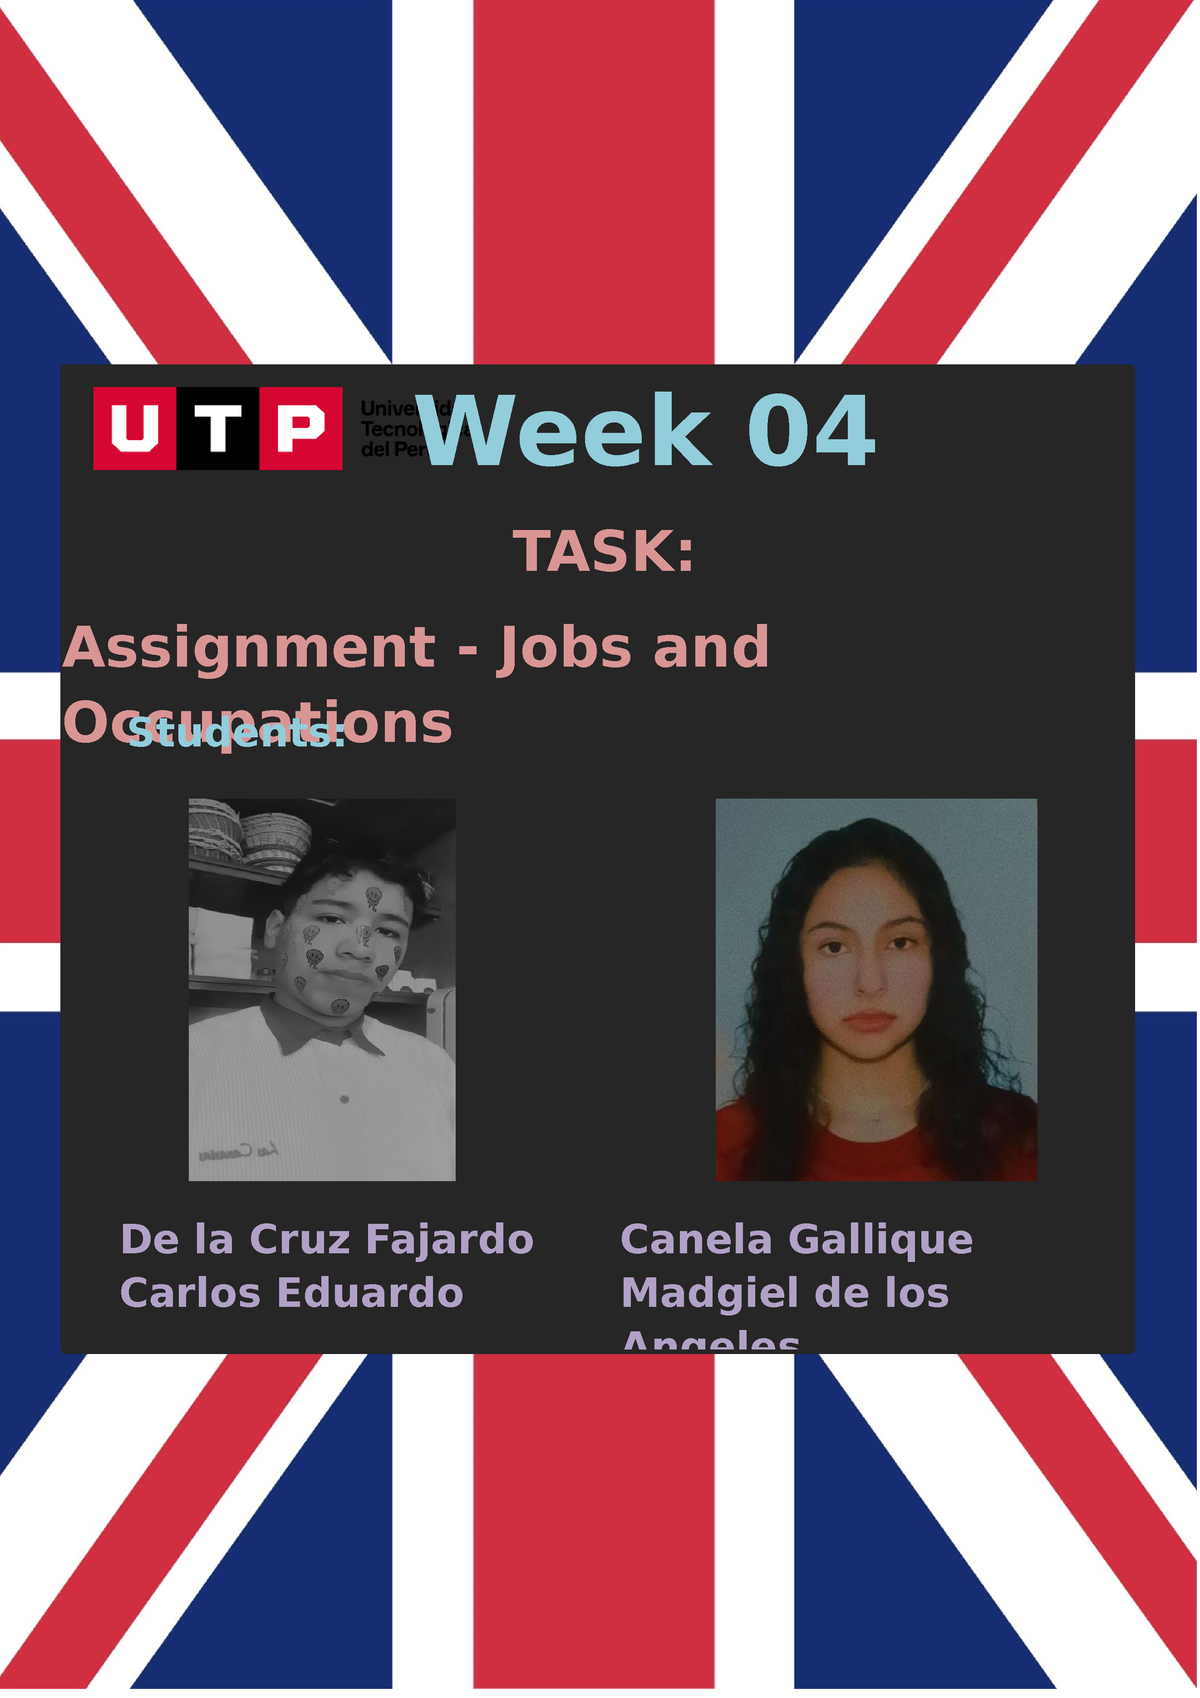 week 4 task assignment jobs and occupations